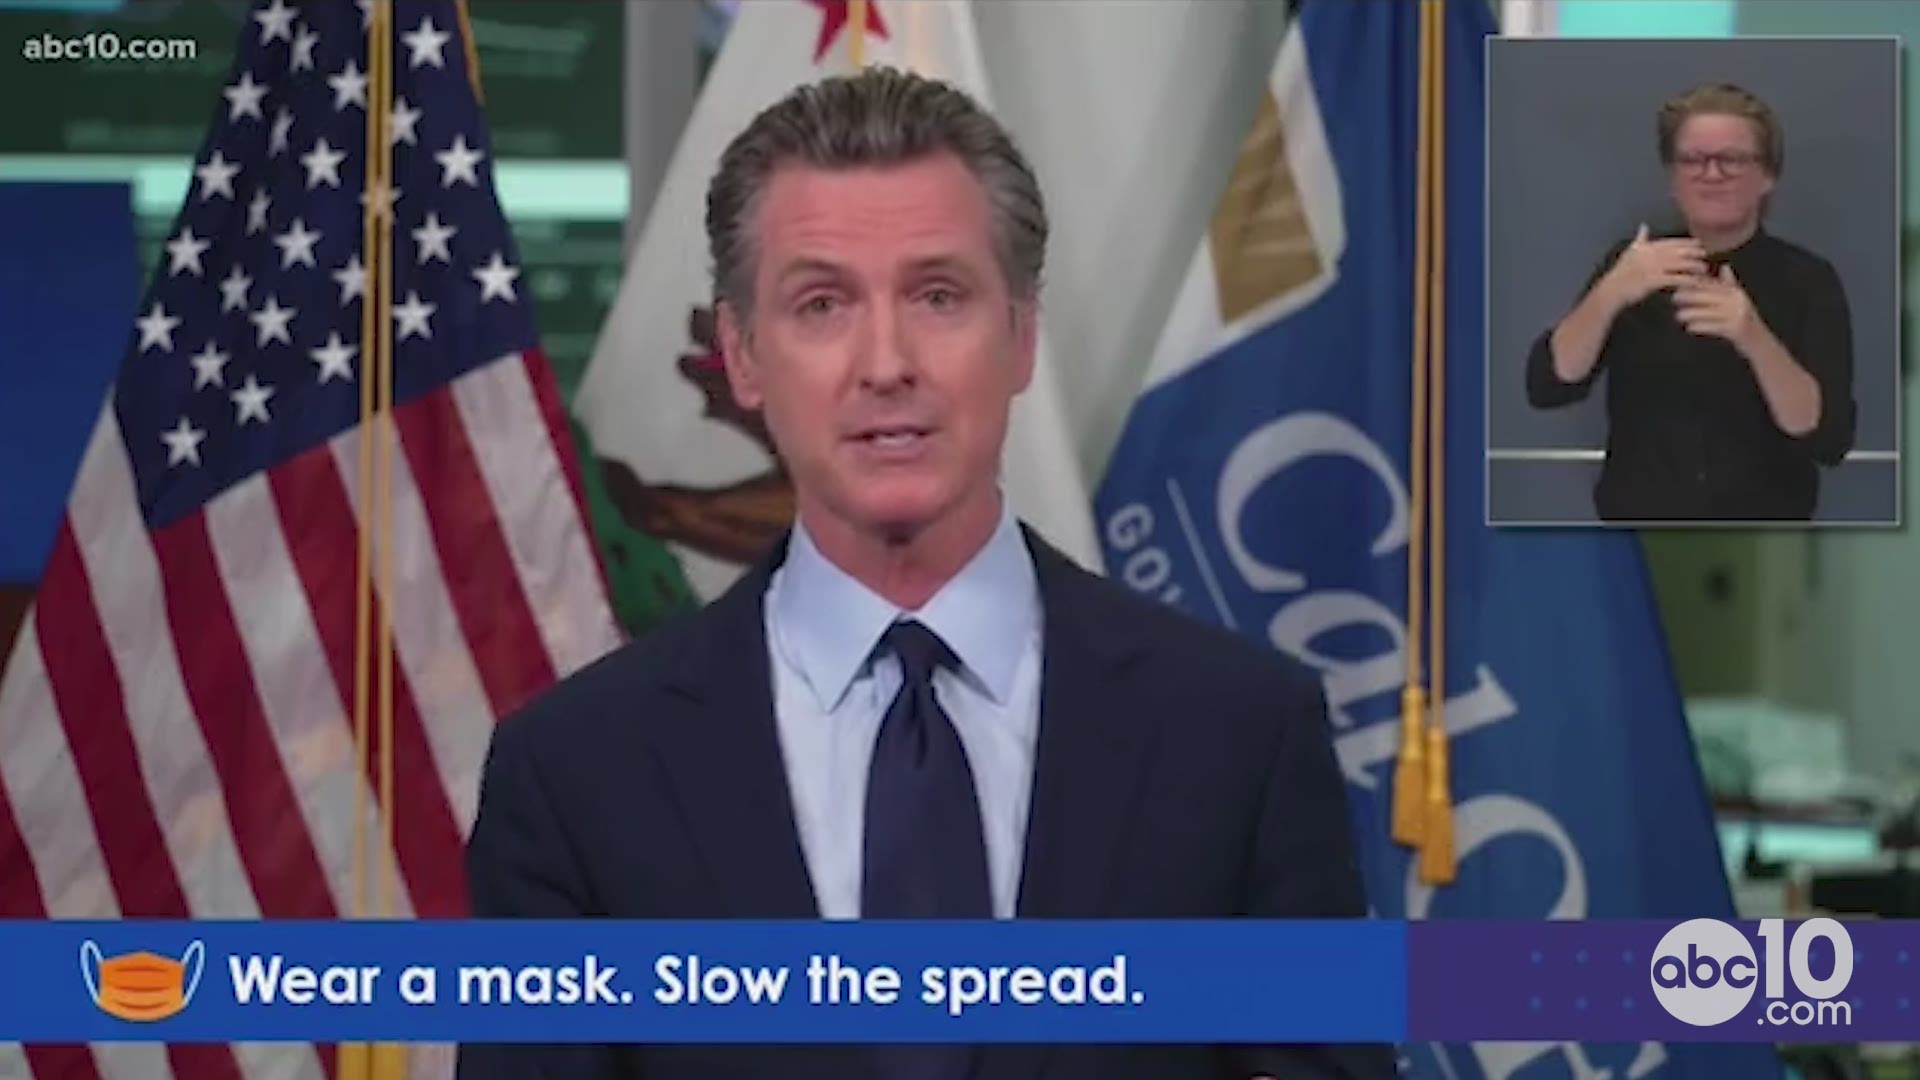 Governor Newsom acknowledges that he did not practice what he preaches in minimizing mixing households by going to a birthday dinner in Napa.